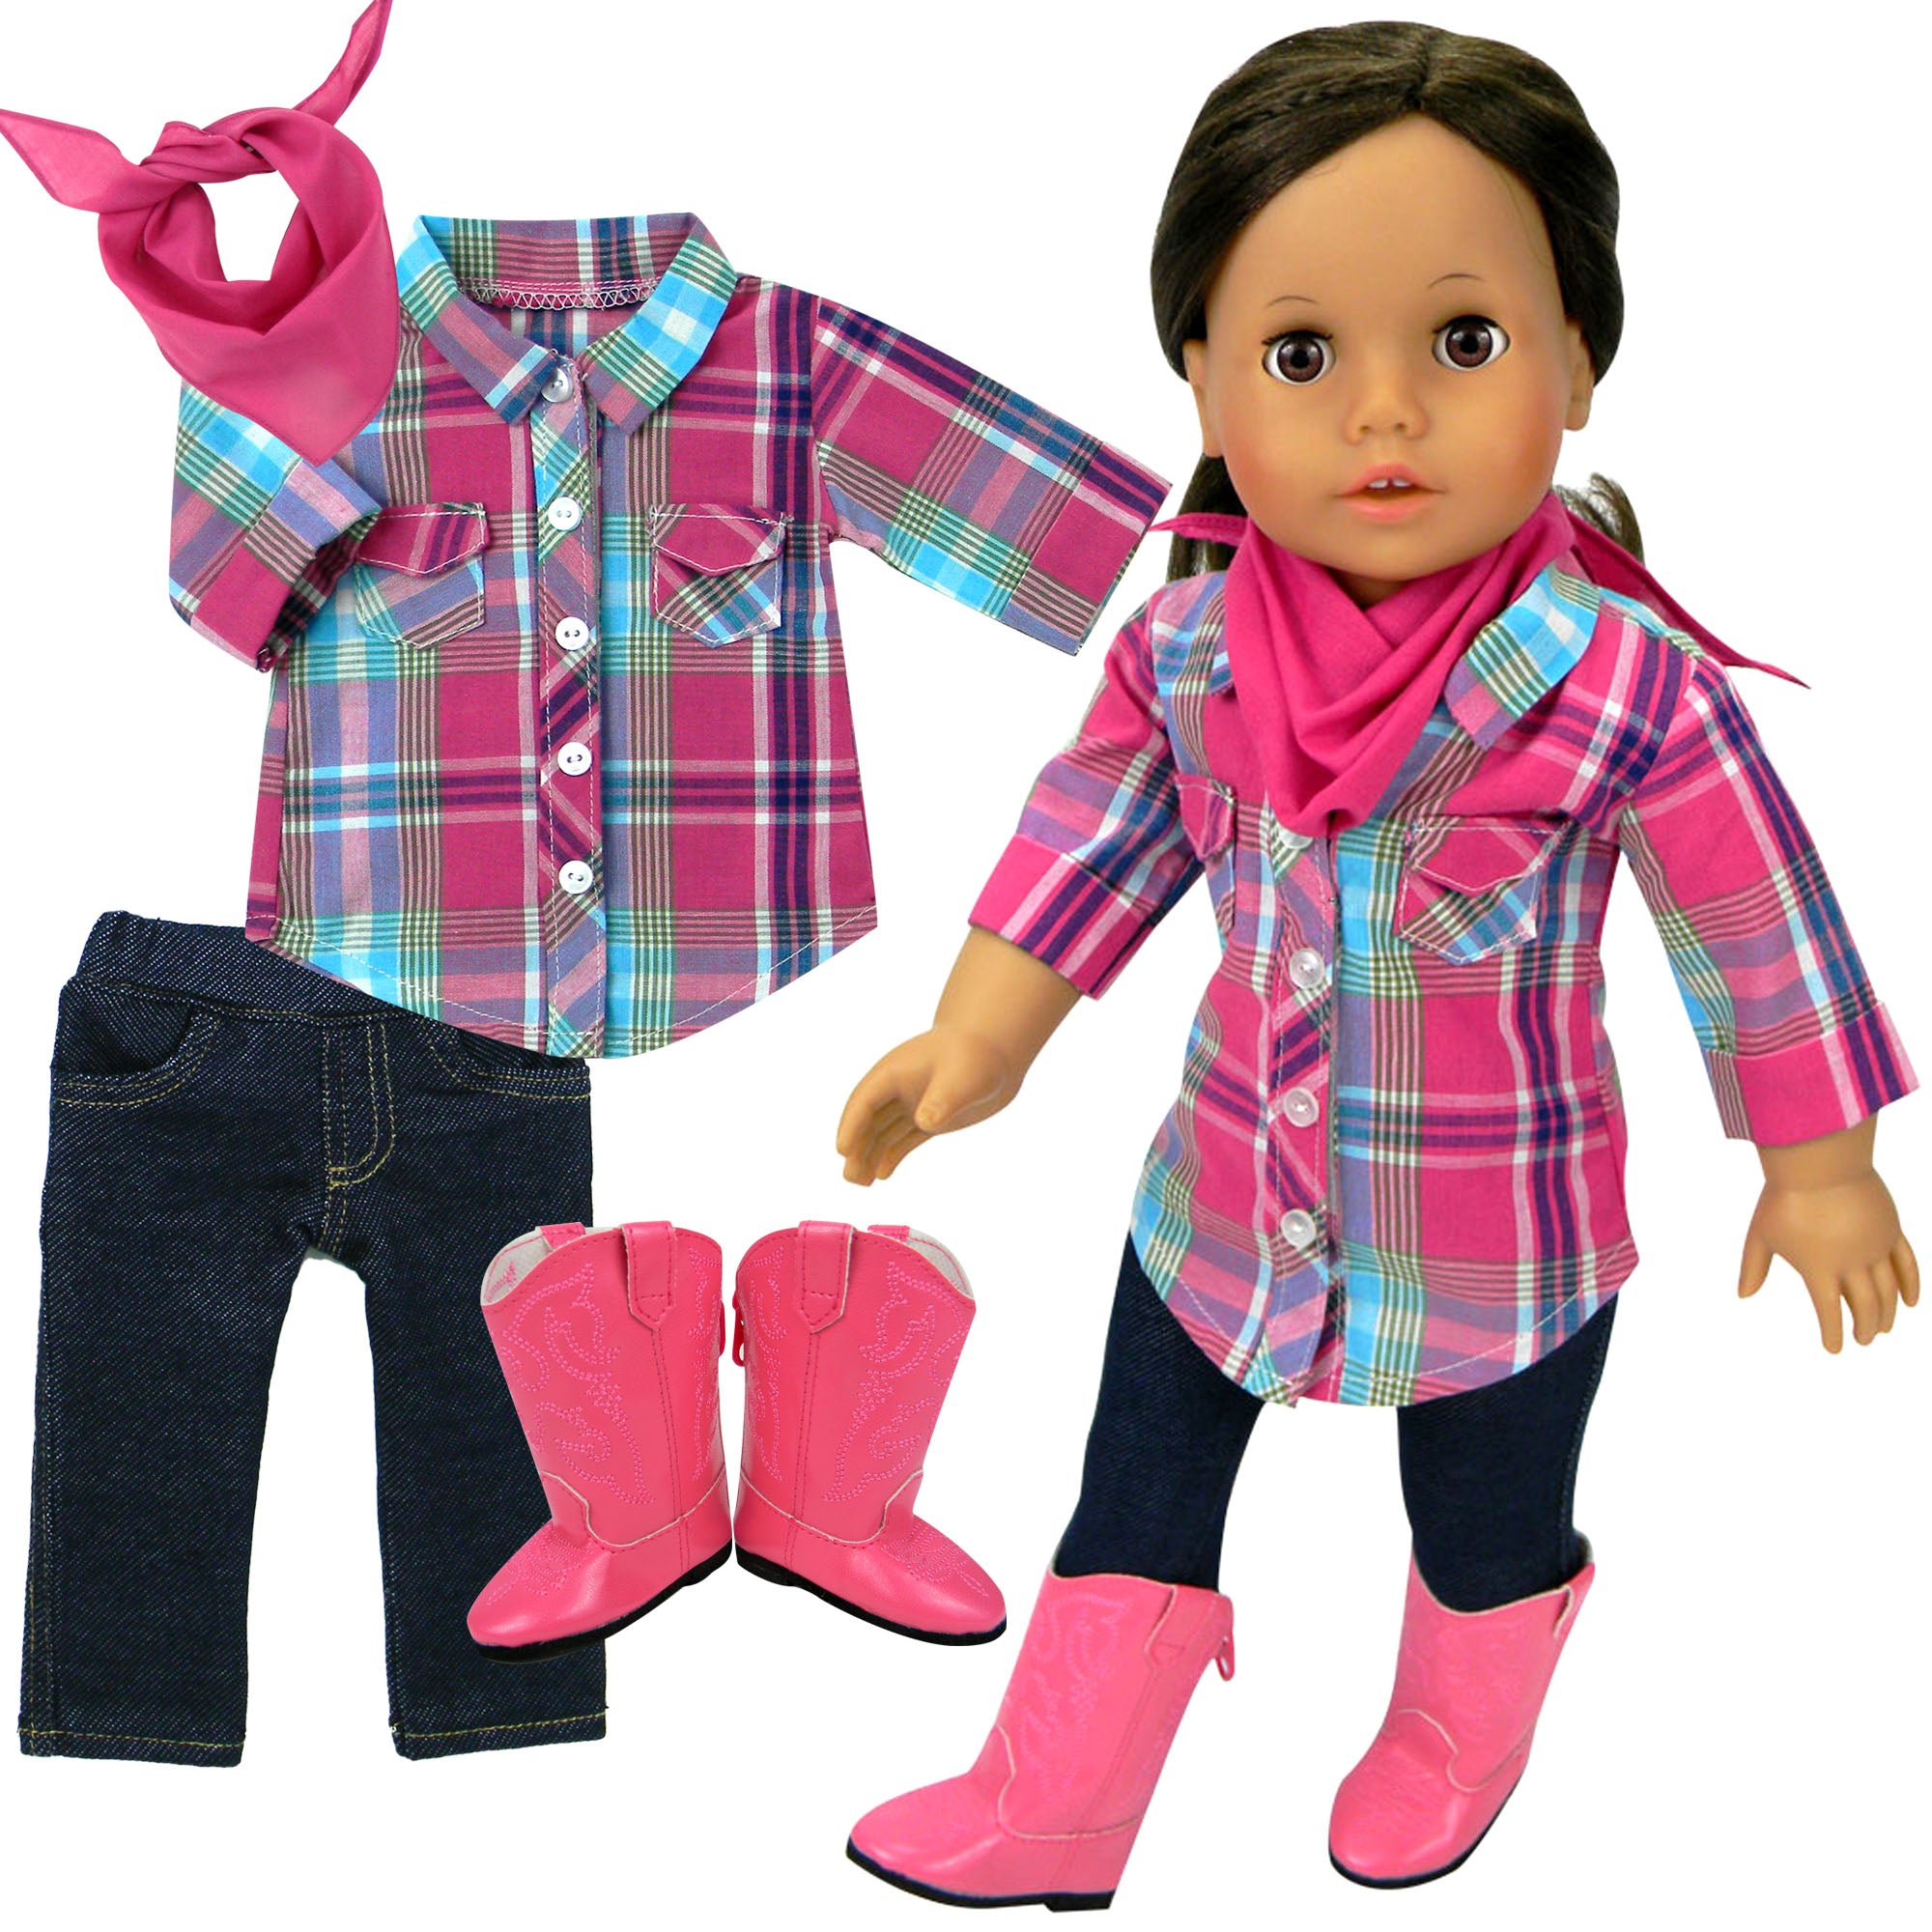 Sophia’s Doll Blouse, Jeggings, Bandana, and Boots for 18" Dolls